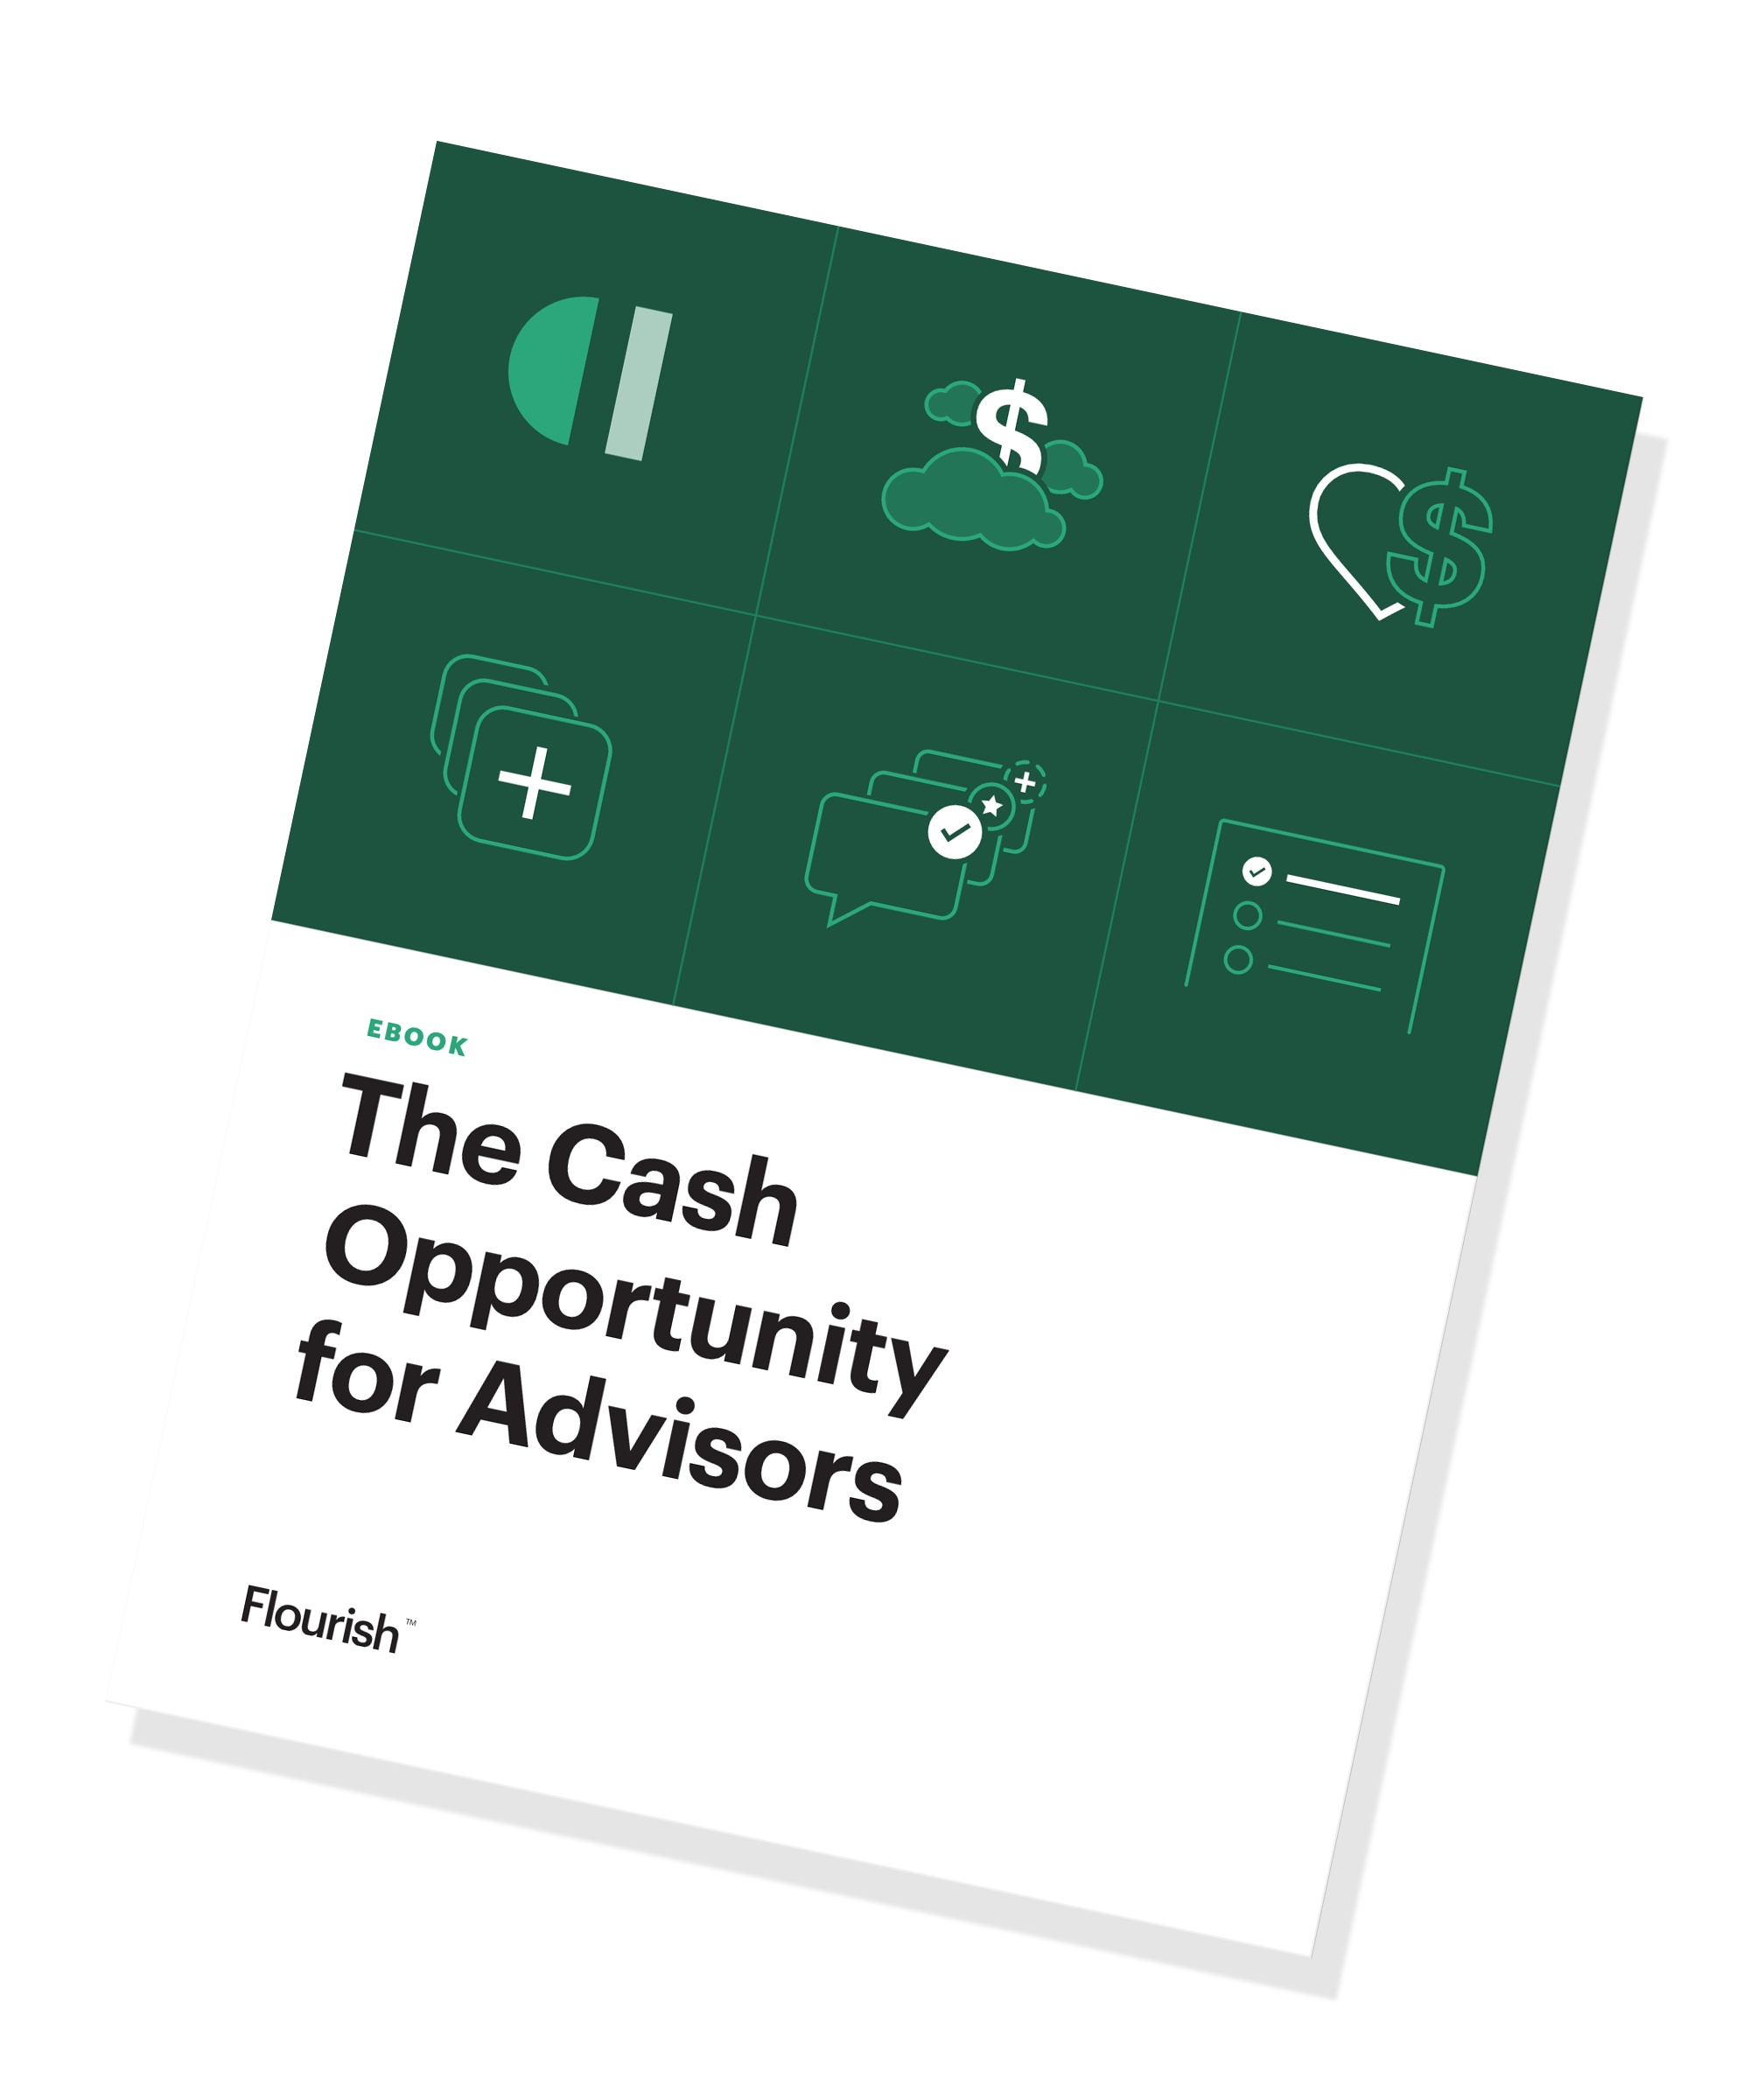 The Cash Opportunity ebook